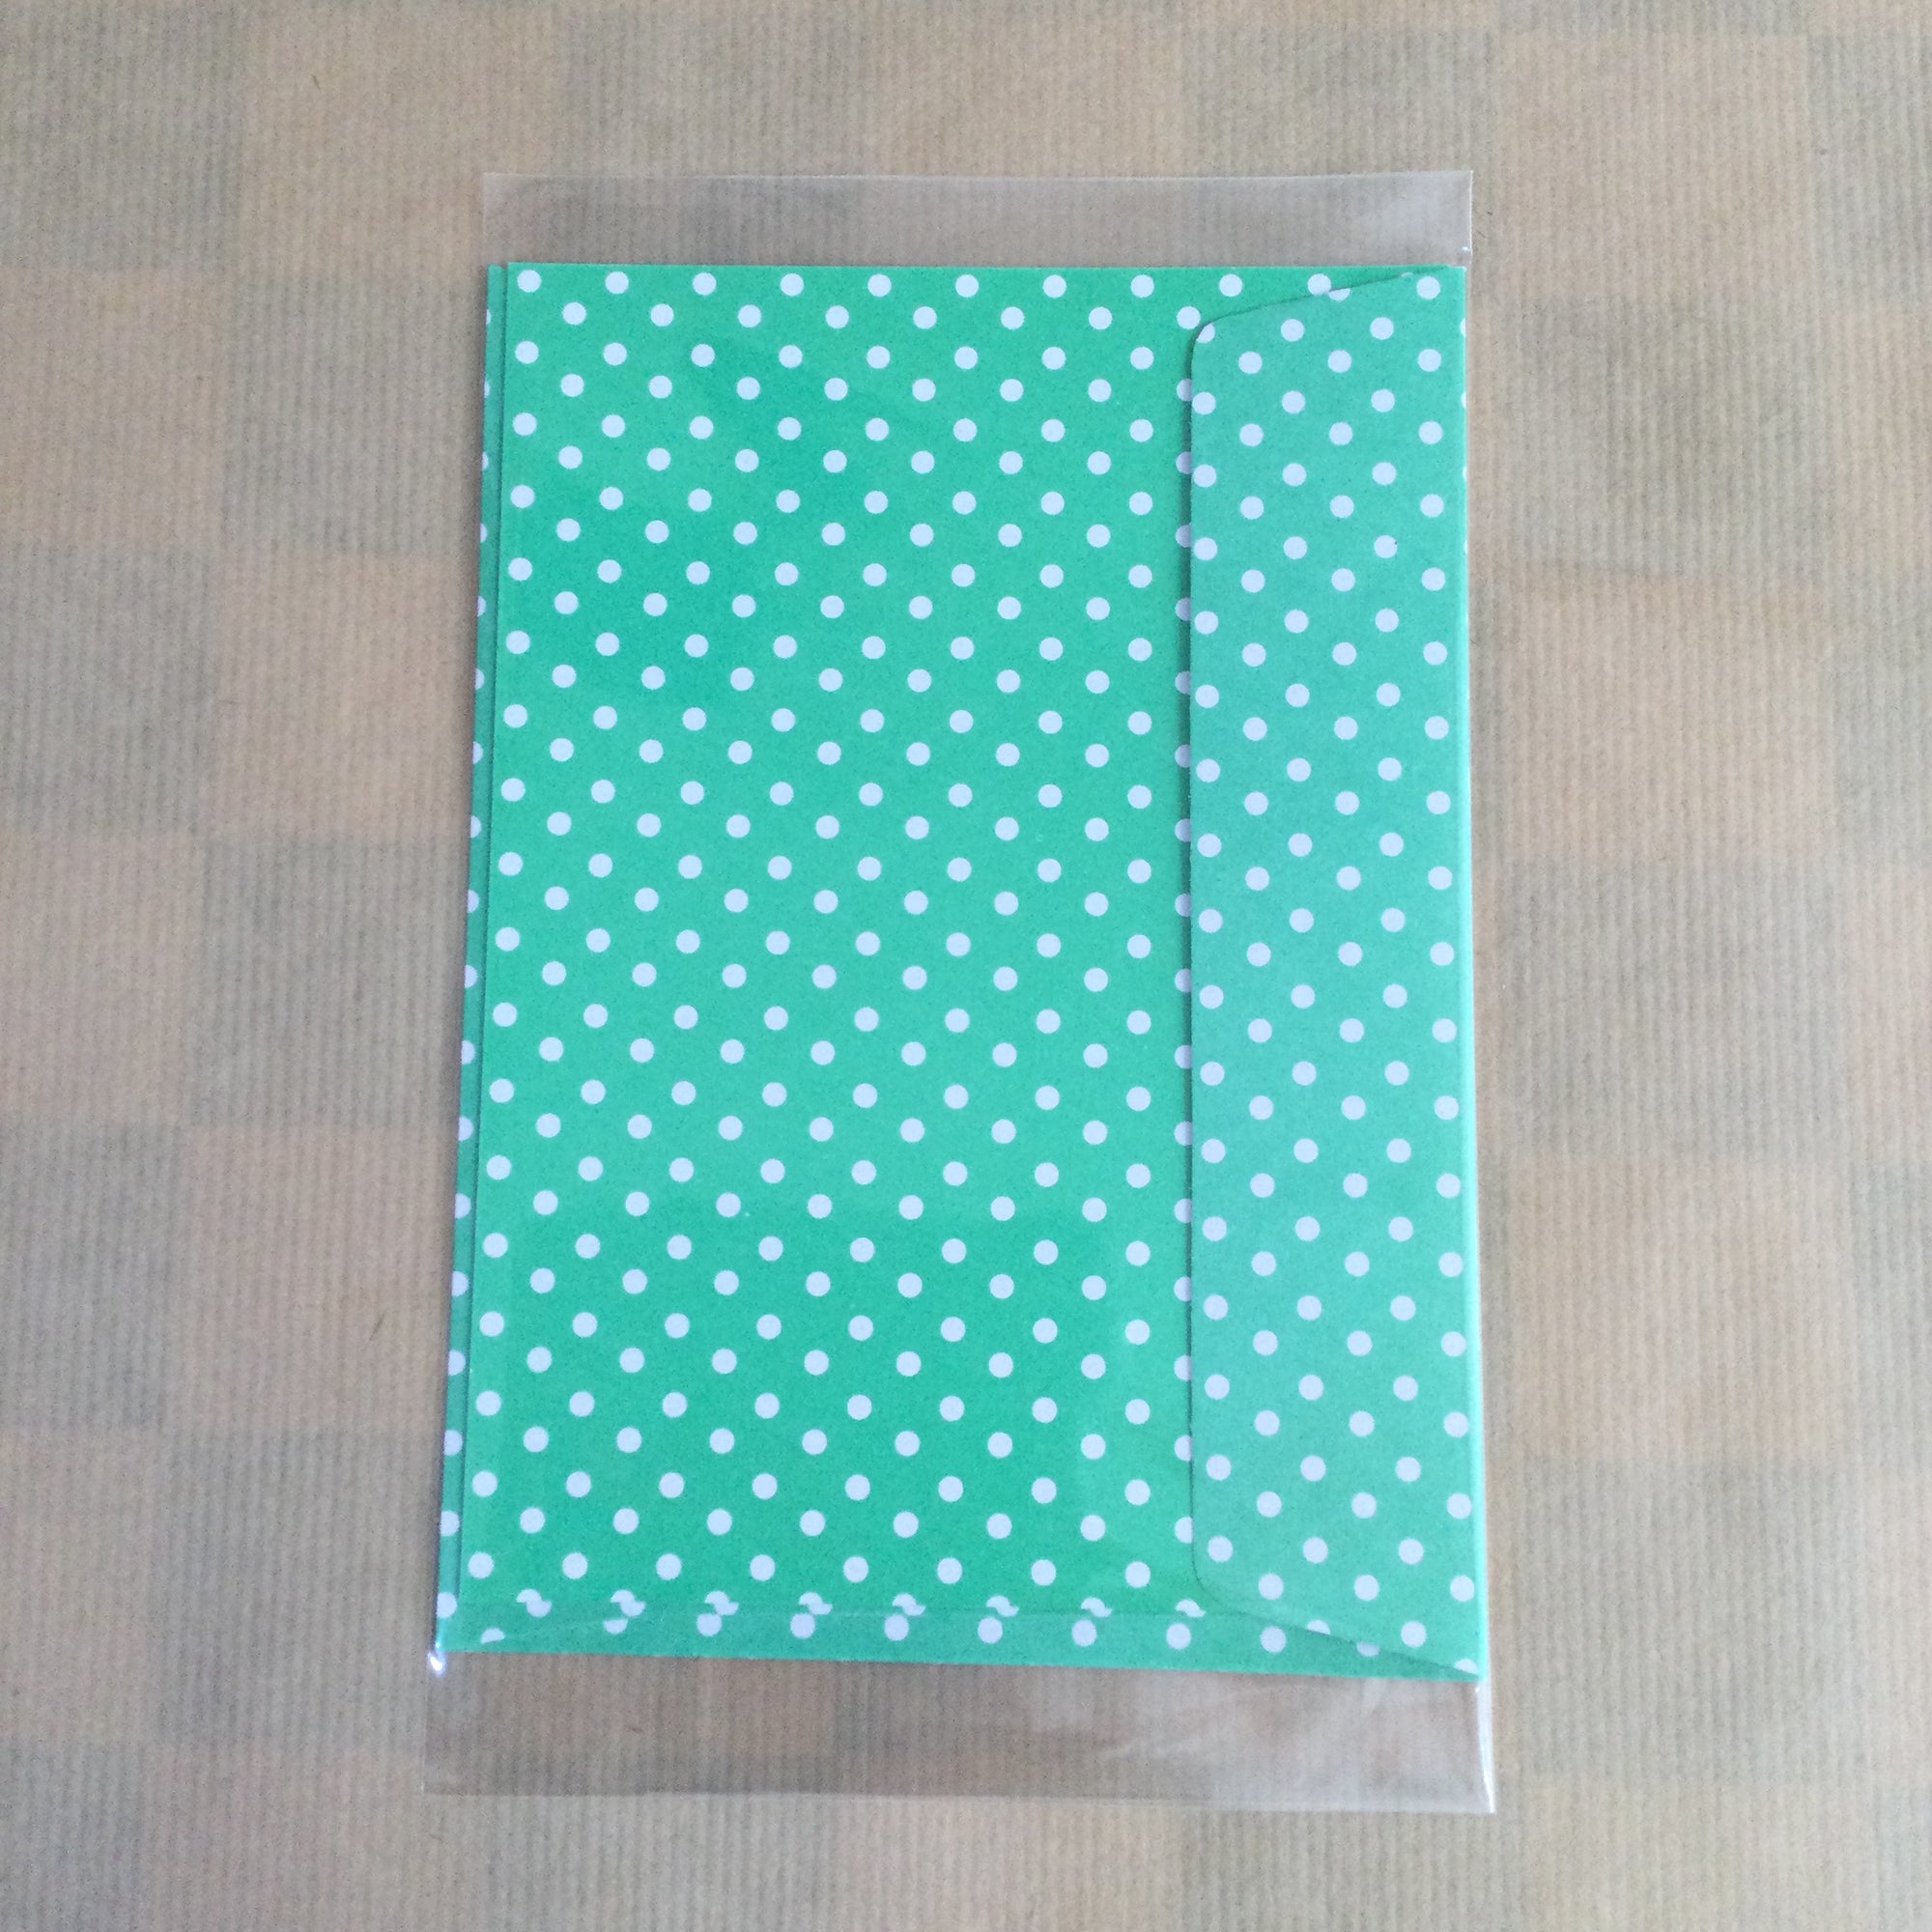 Single Spotted Card with Envelope